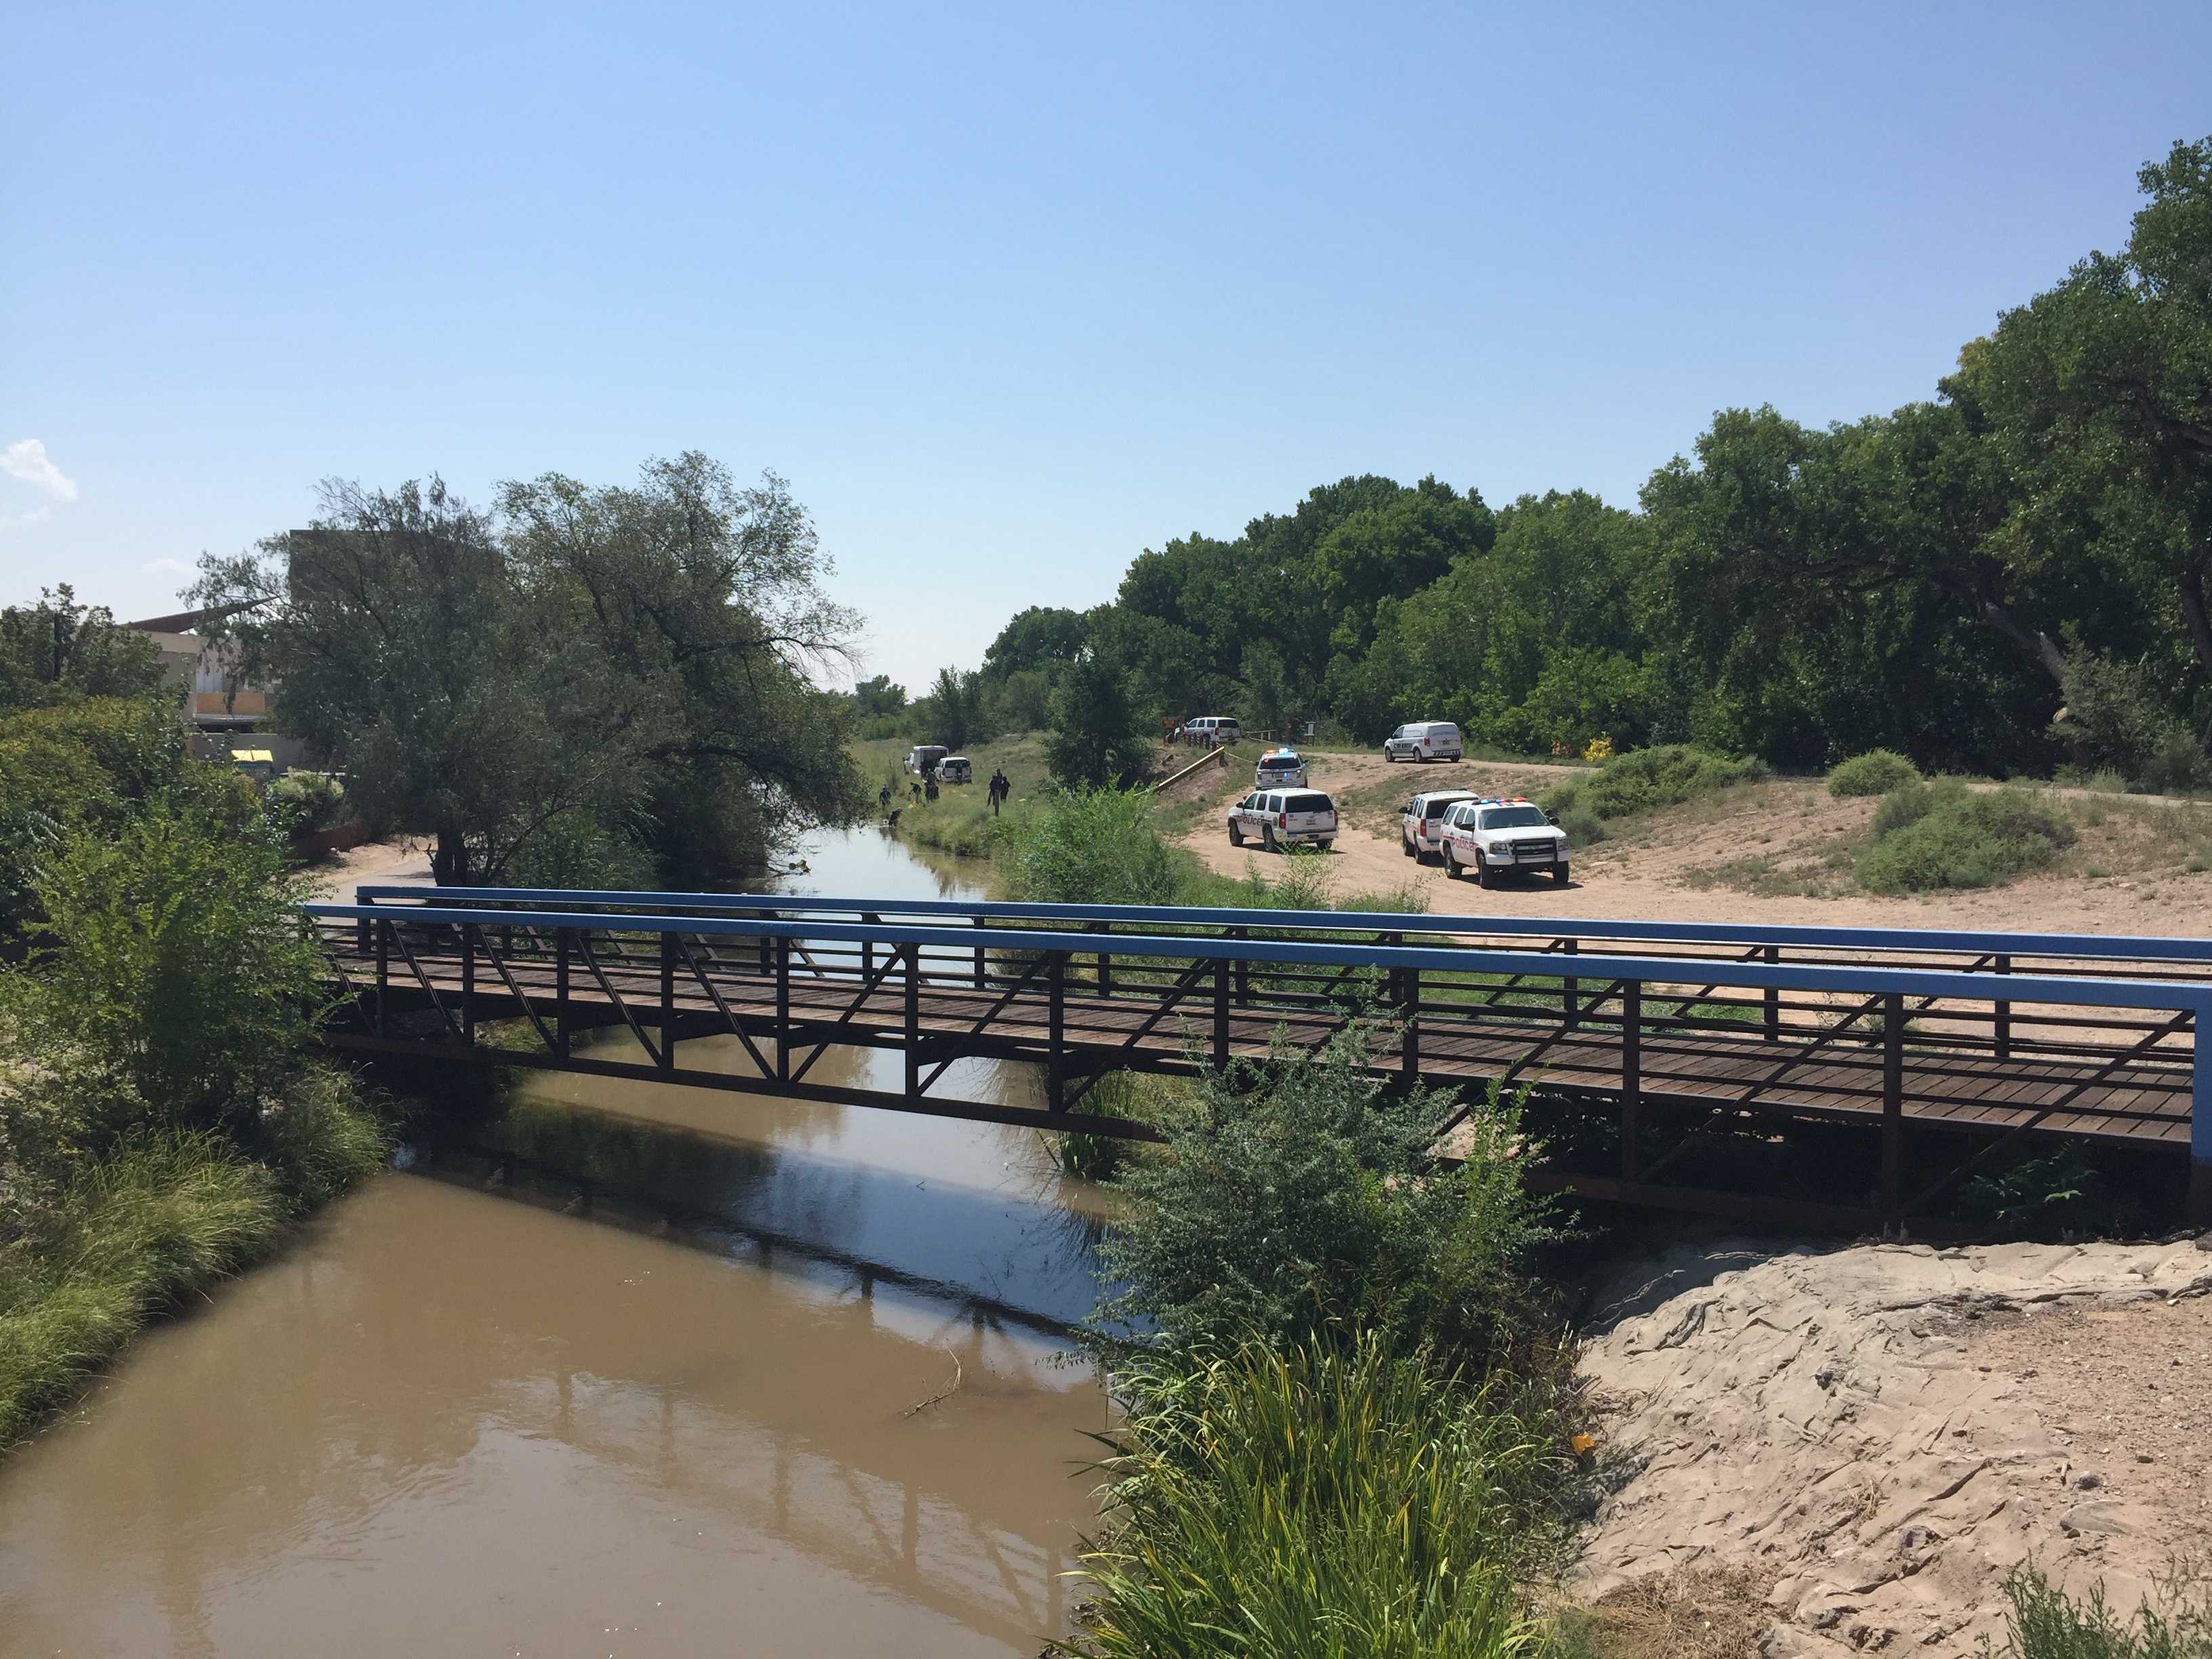 Body recovered from irrigation canal near Hispanic Cultural Center